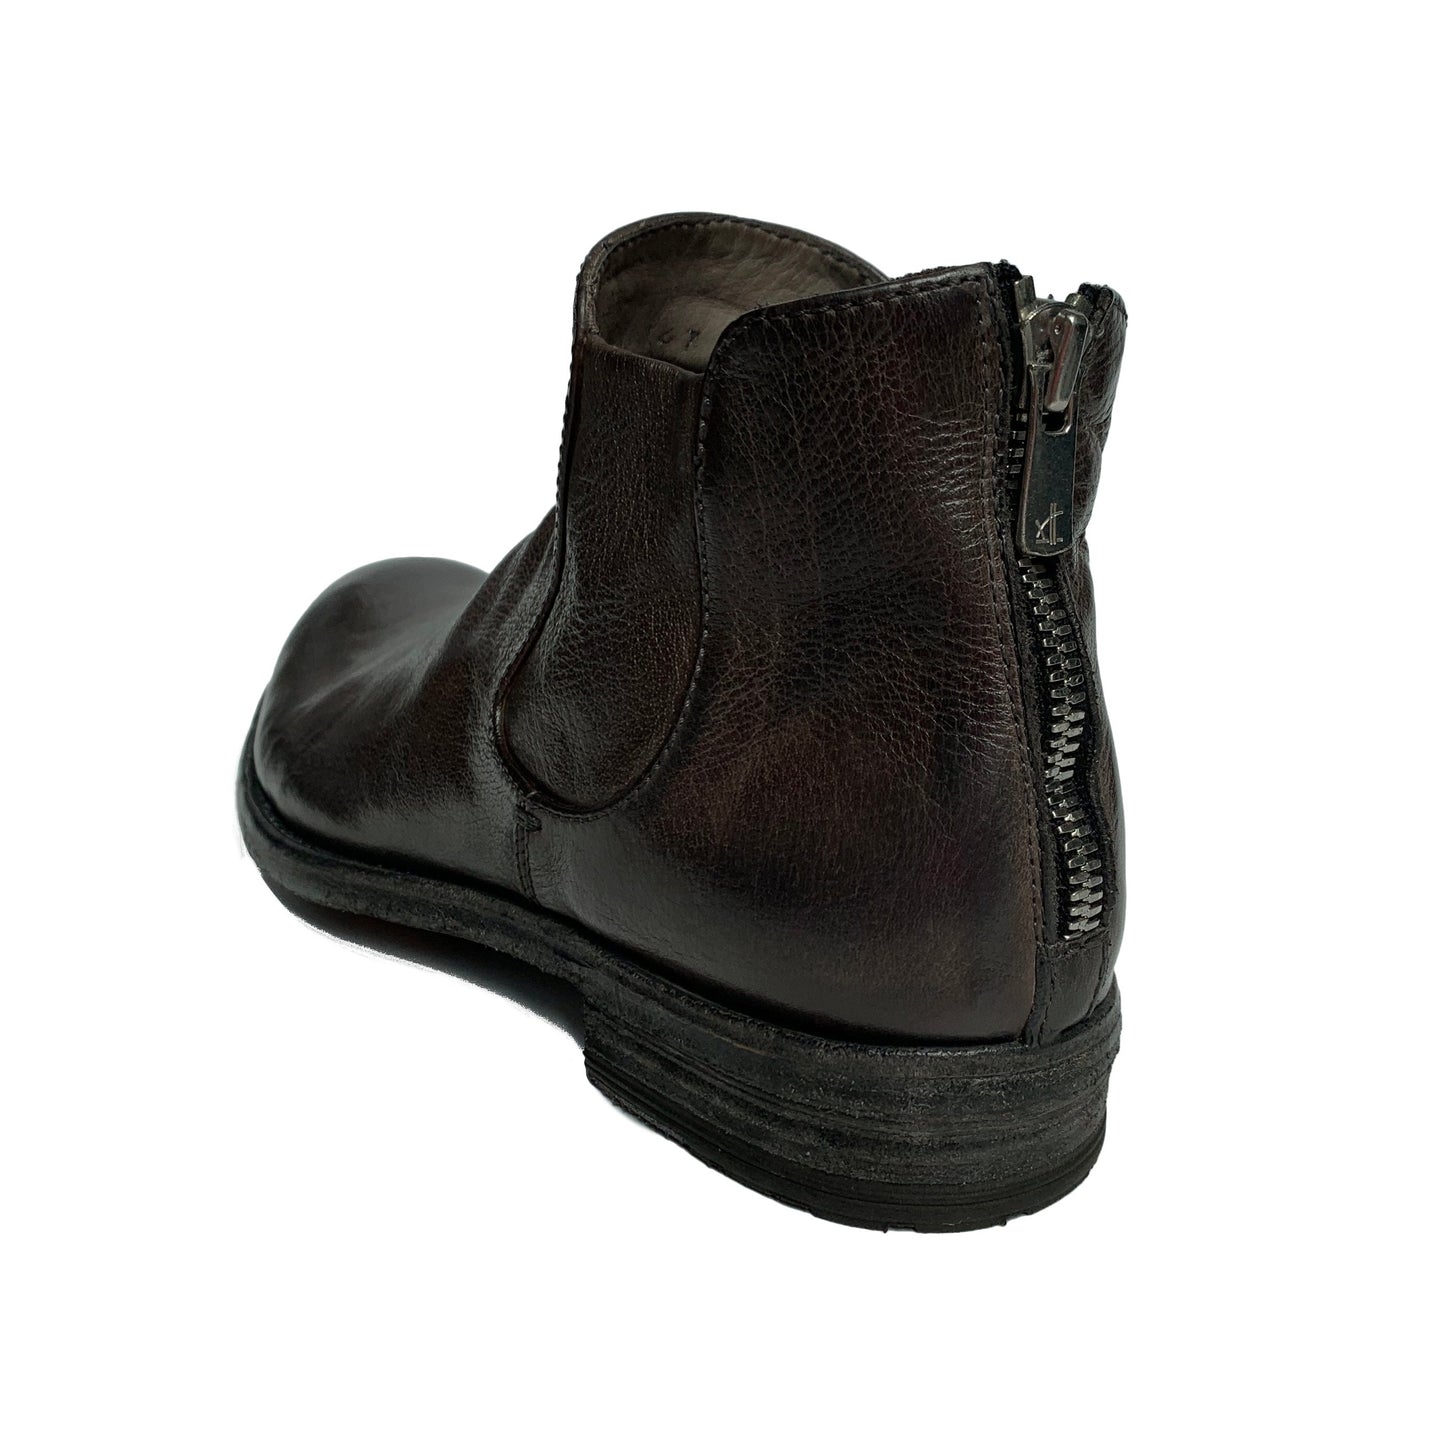 Lexikon 147 Leather Boot in Magnete